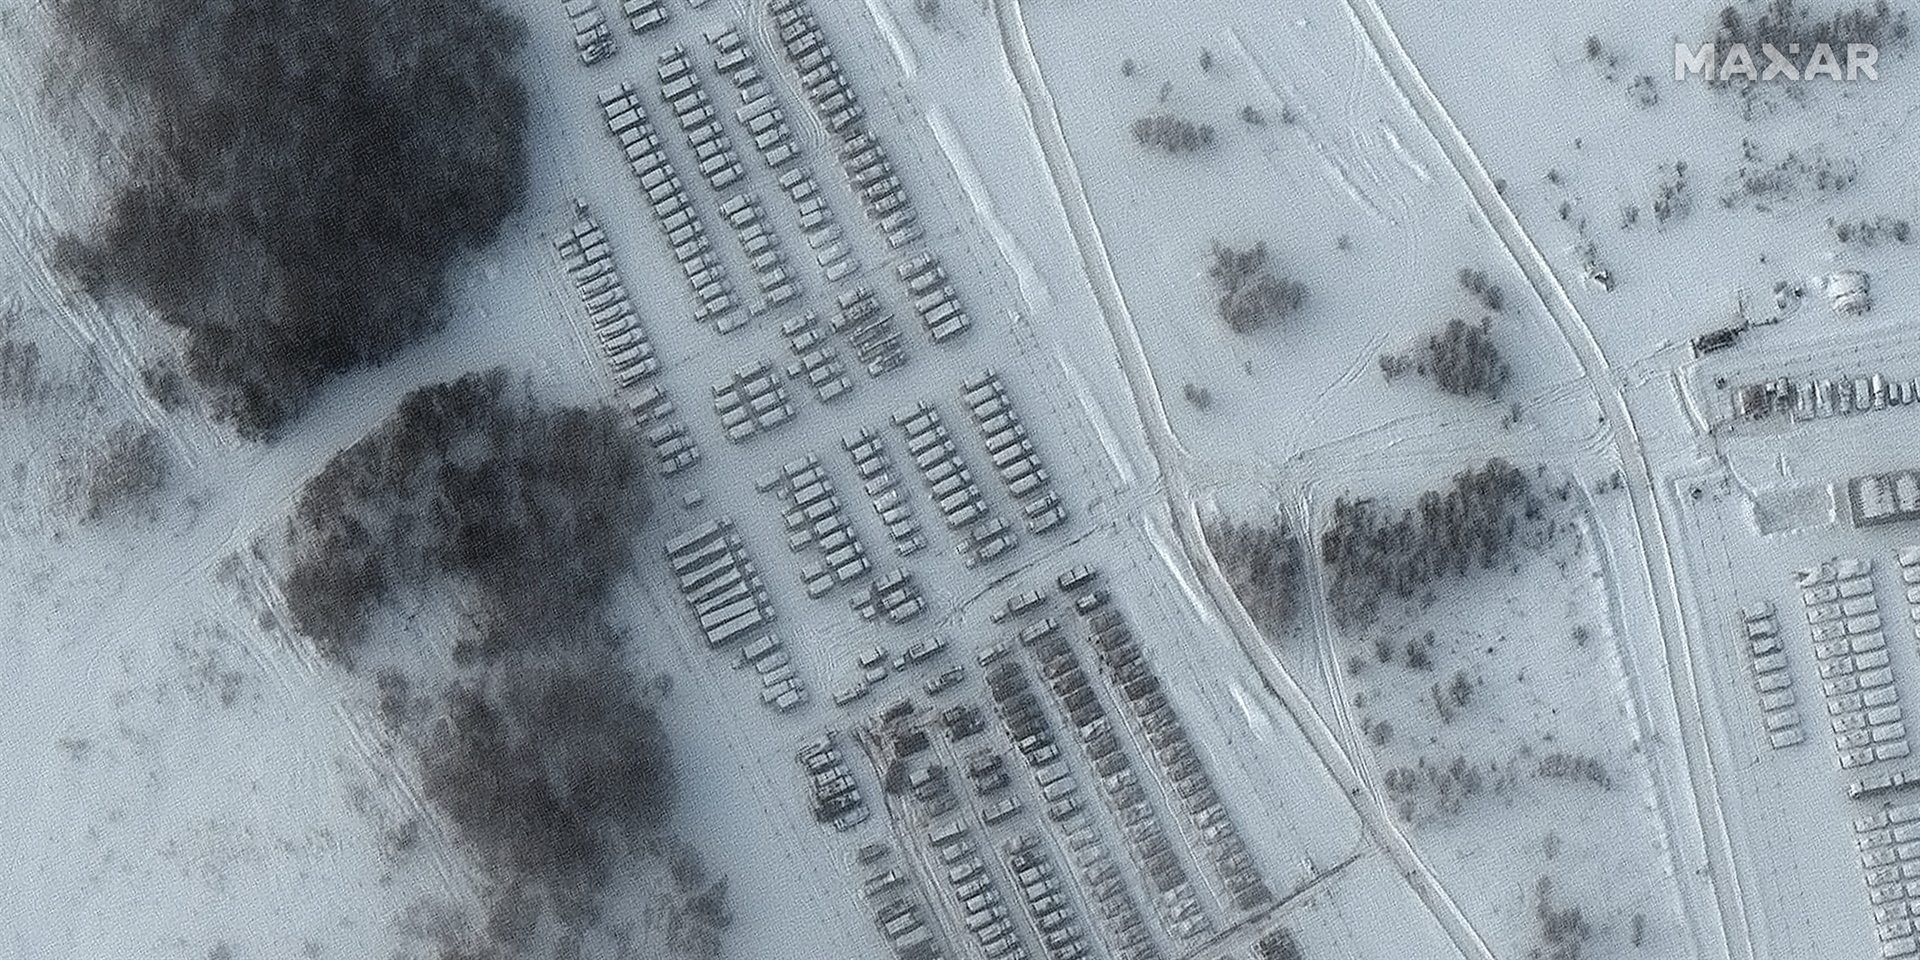 View of tanks, artillery, and tents in Yelyna, Russia, which is about 80 miles east of Belarus, on Jan. 19, 2022. Satellite image ©2022 Maxar Technologies